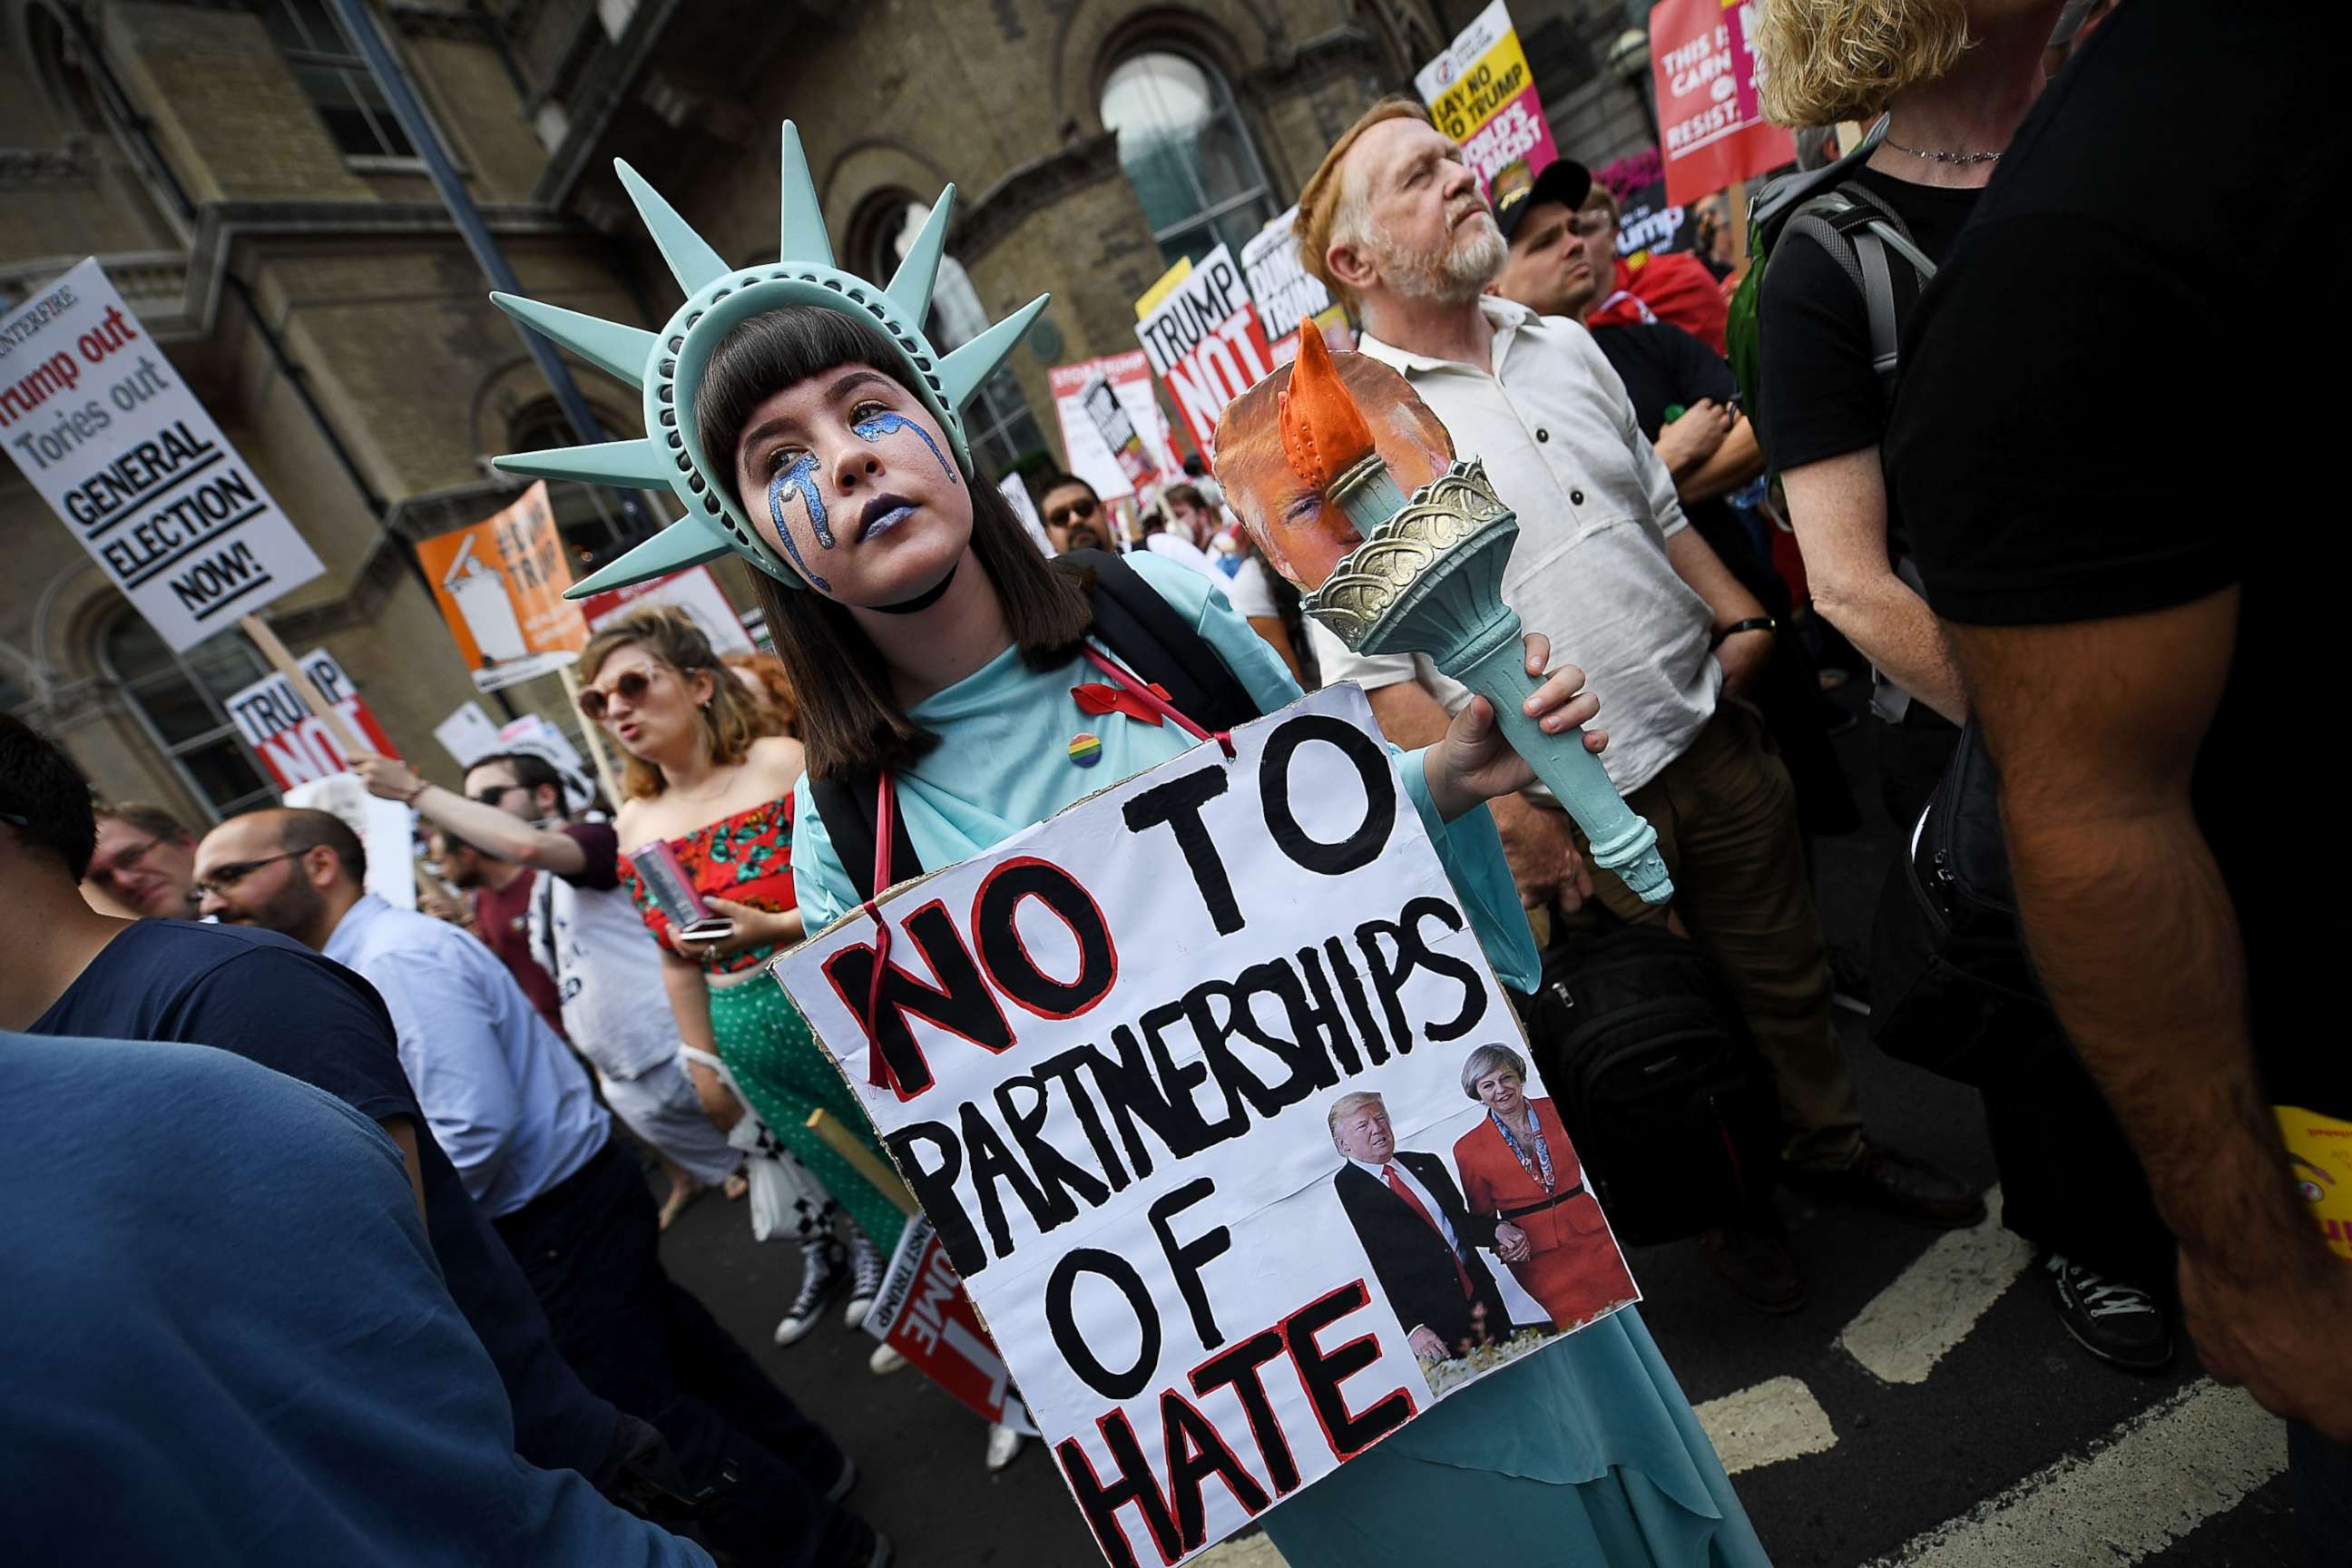 PHOTO: A protester takes part in a demonstration against President Trump's visit to the U.K., near Portland Place on July 13, 2018 in London.